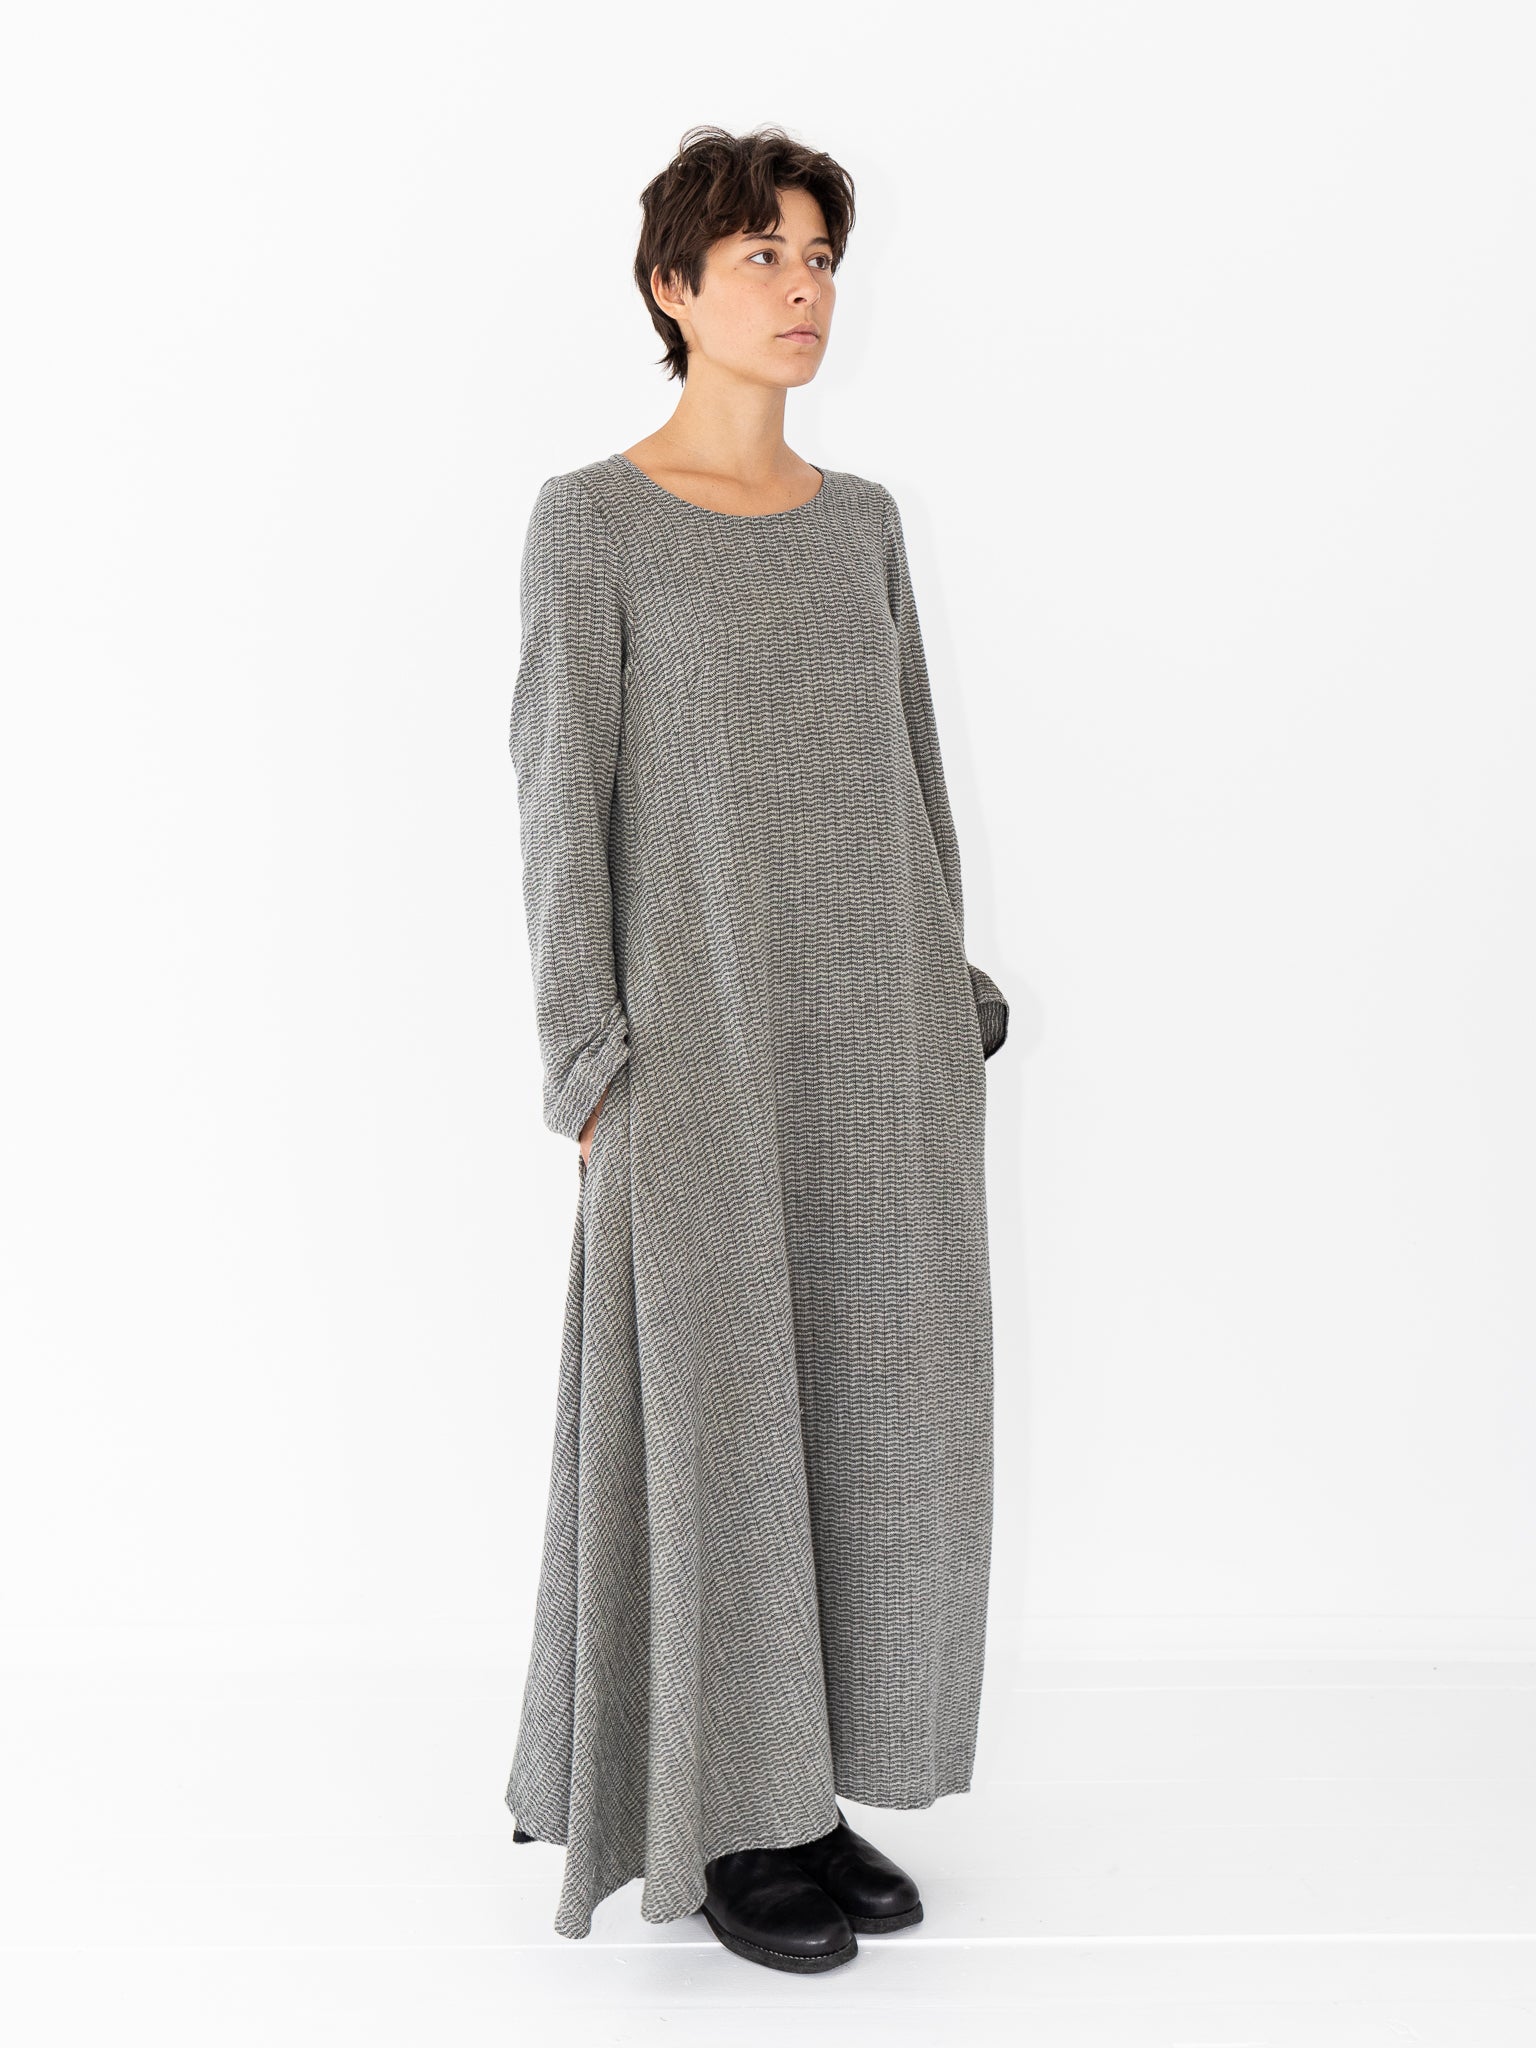 Atelier Suppan Long Twisted Dress - Worthwhile